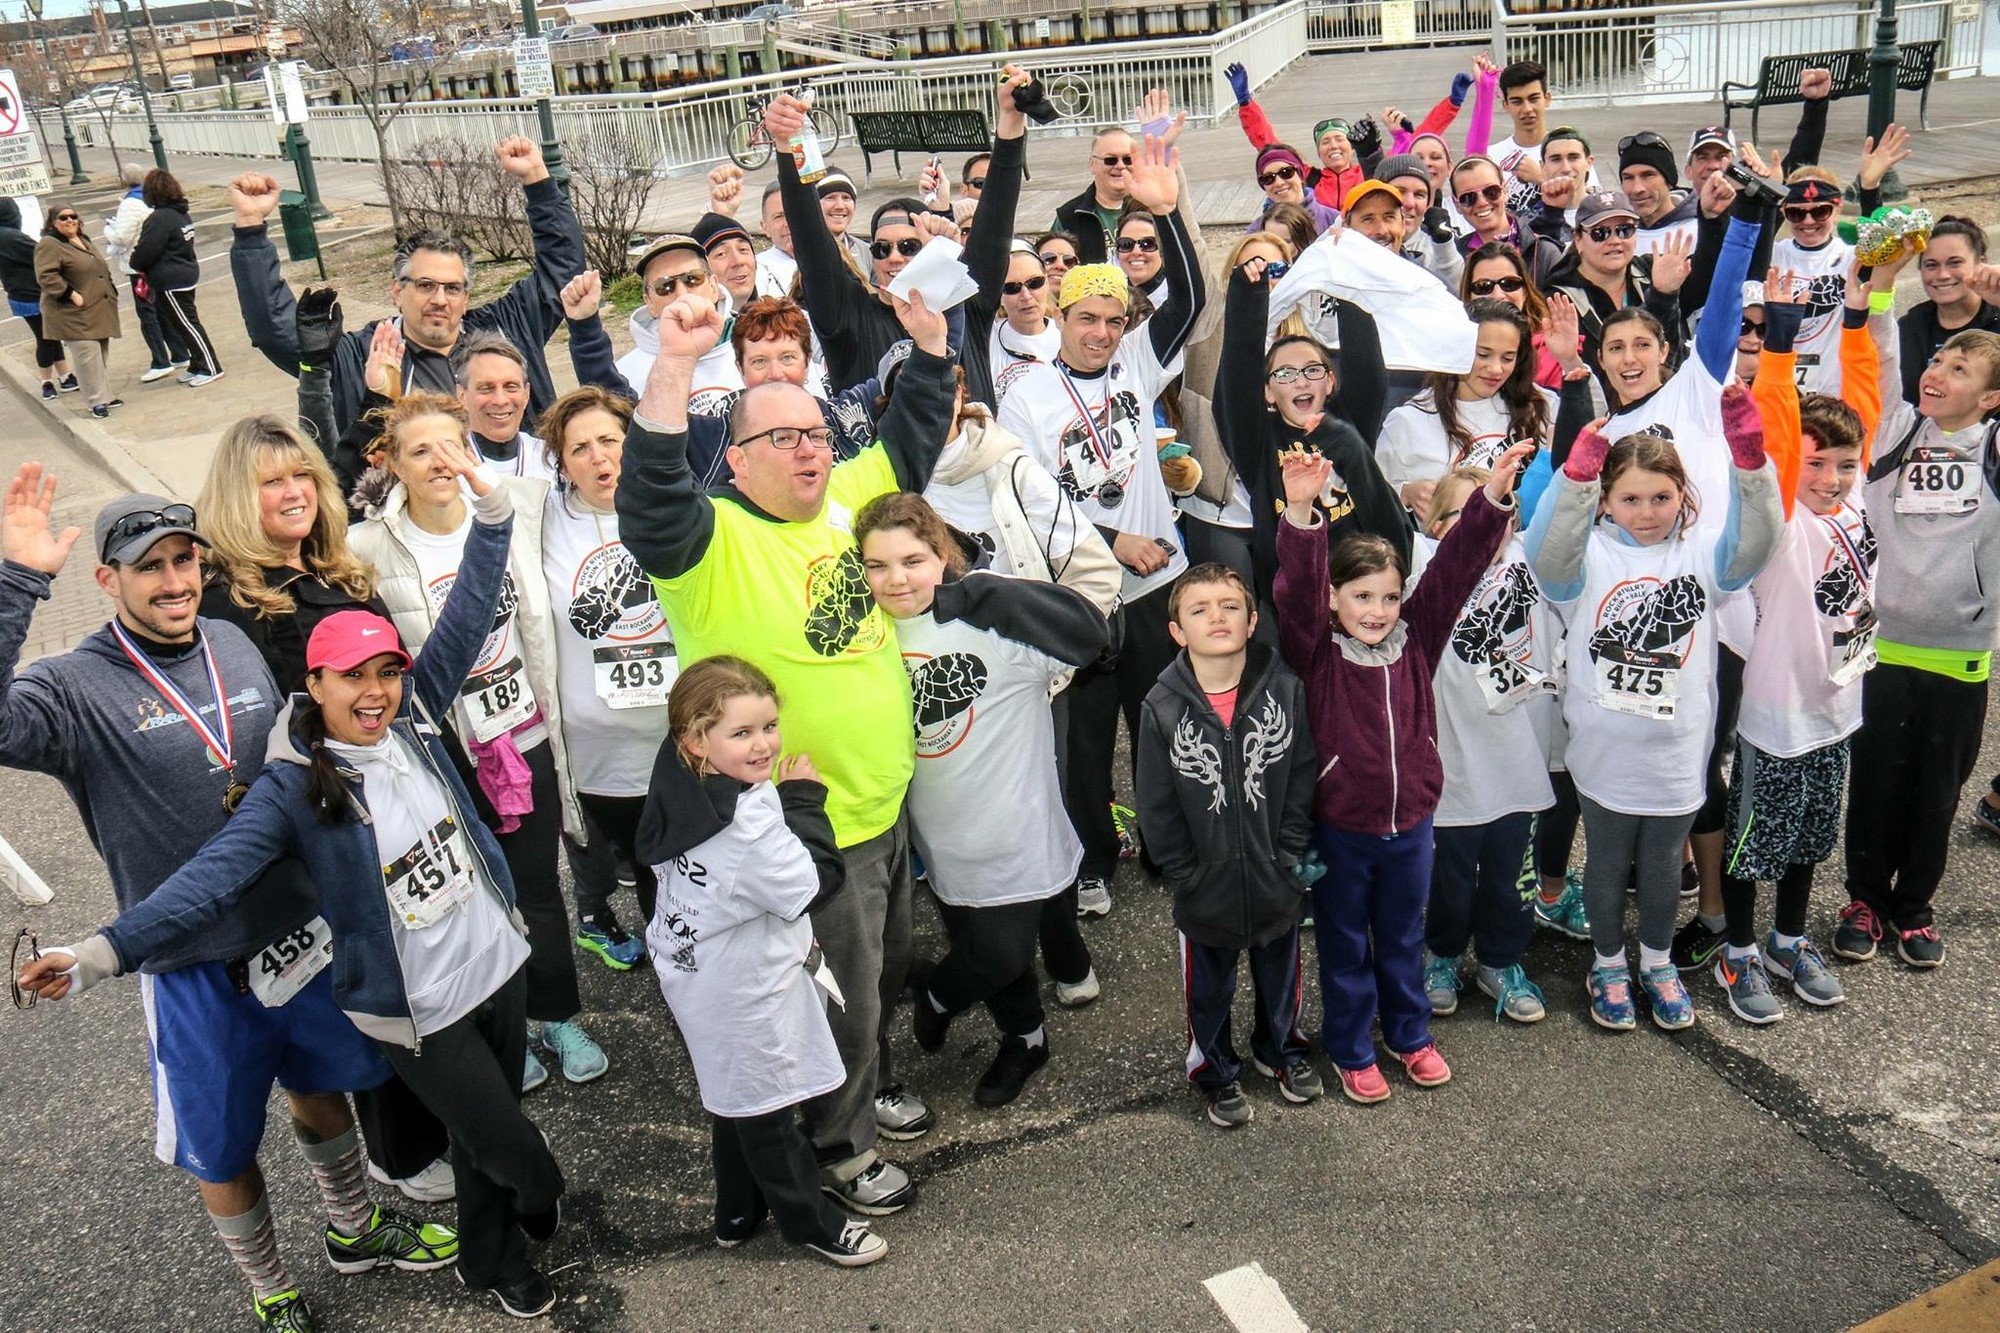 The first Rock Rivalry 5K race, hosted by the East Rockaway Education Foundation, was a big hit!